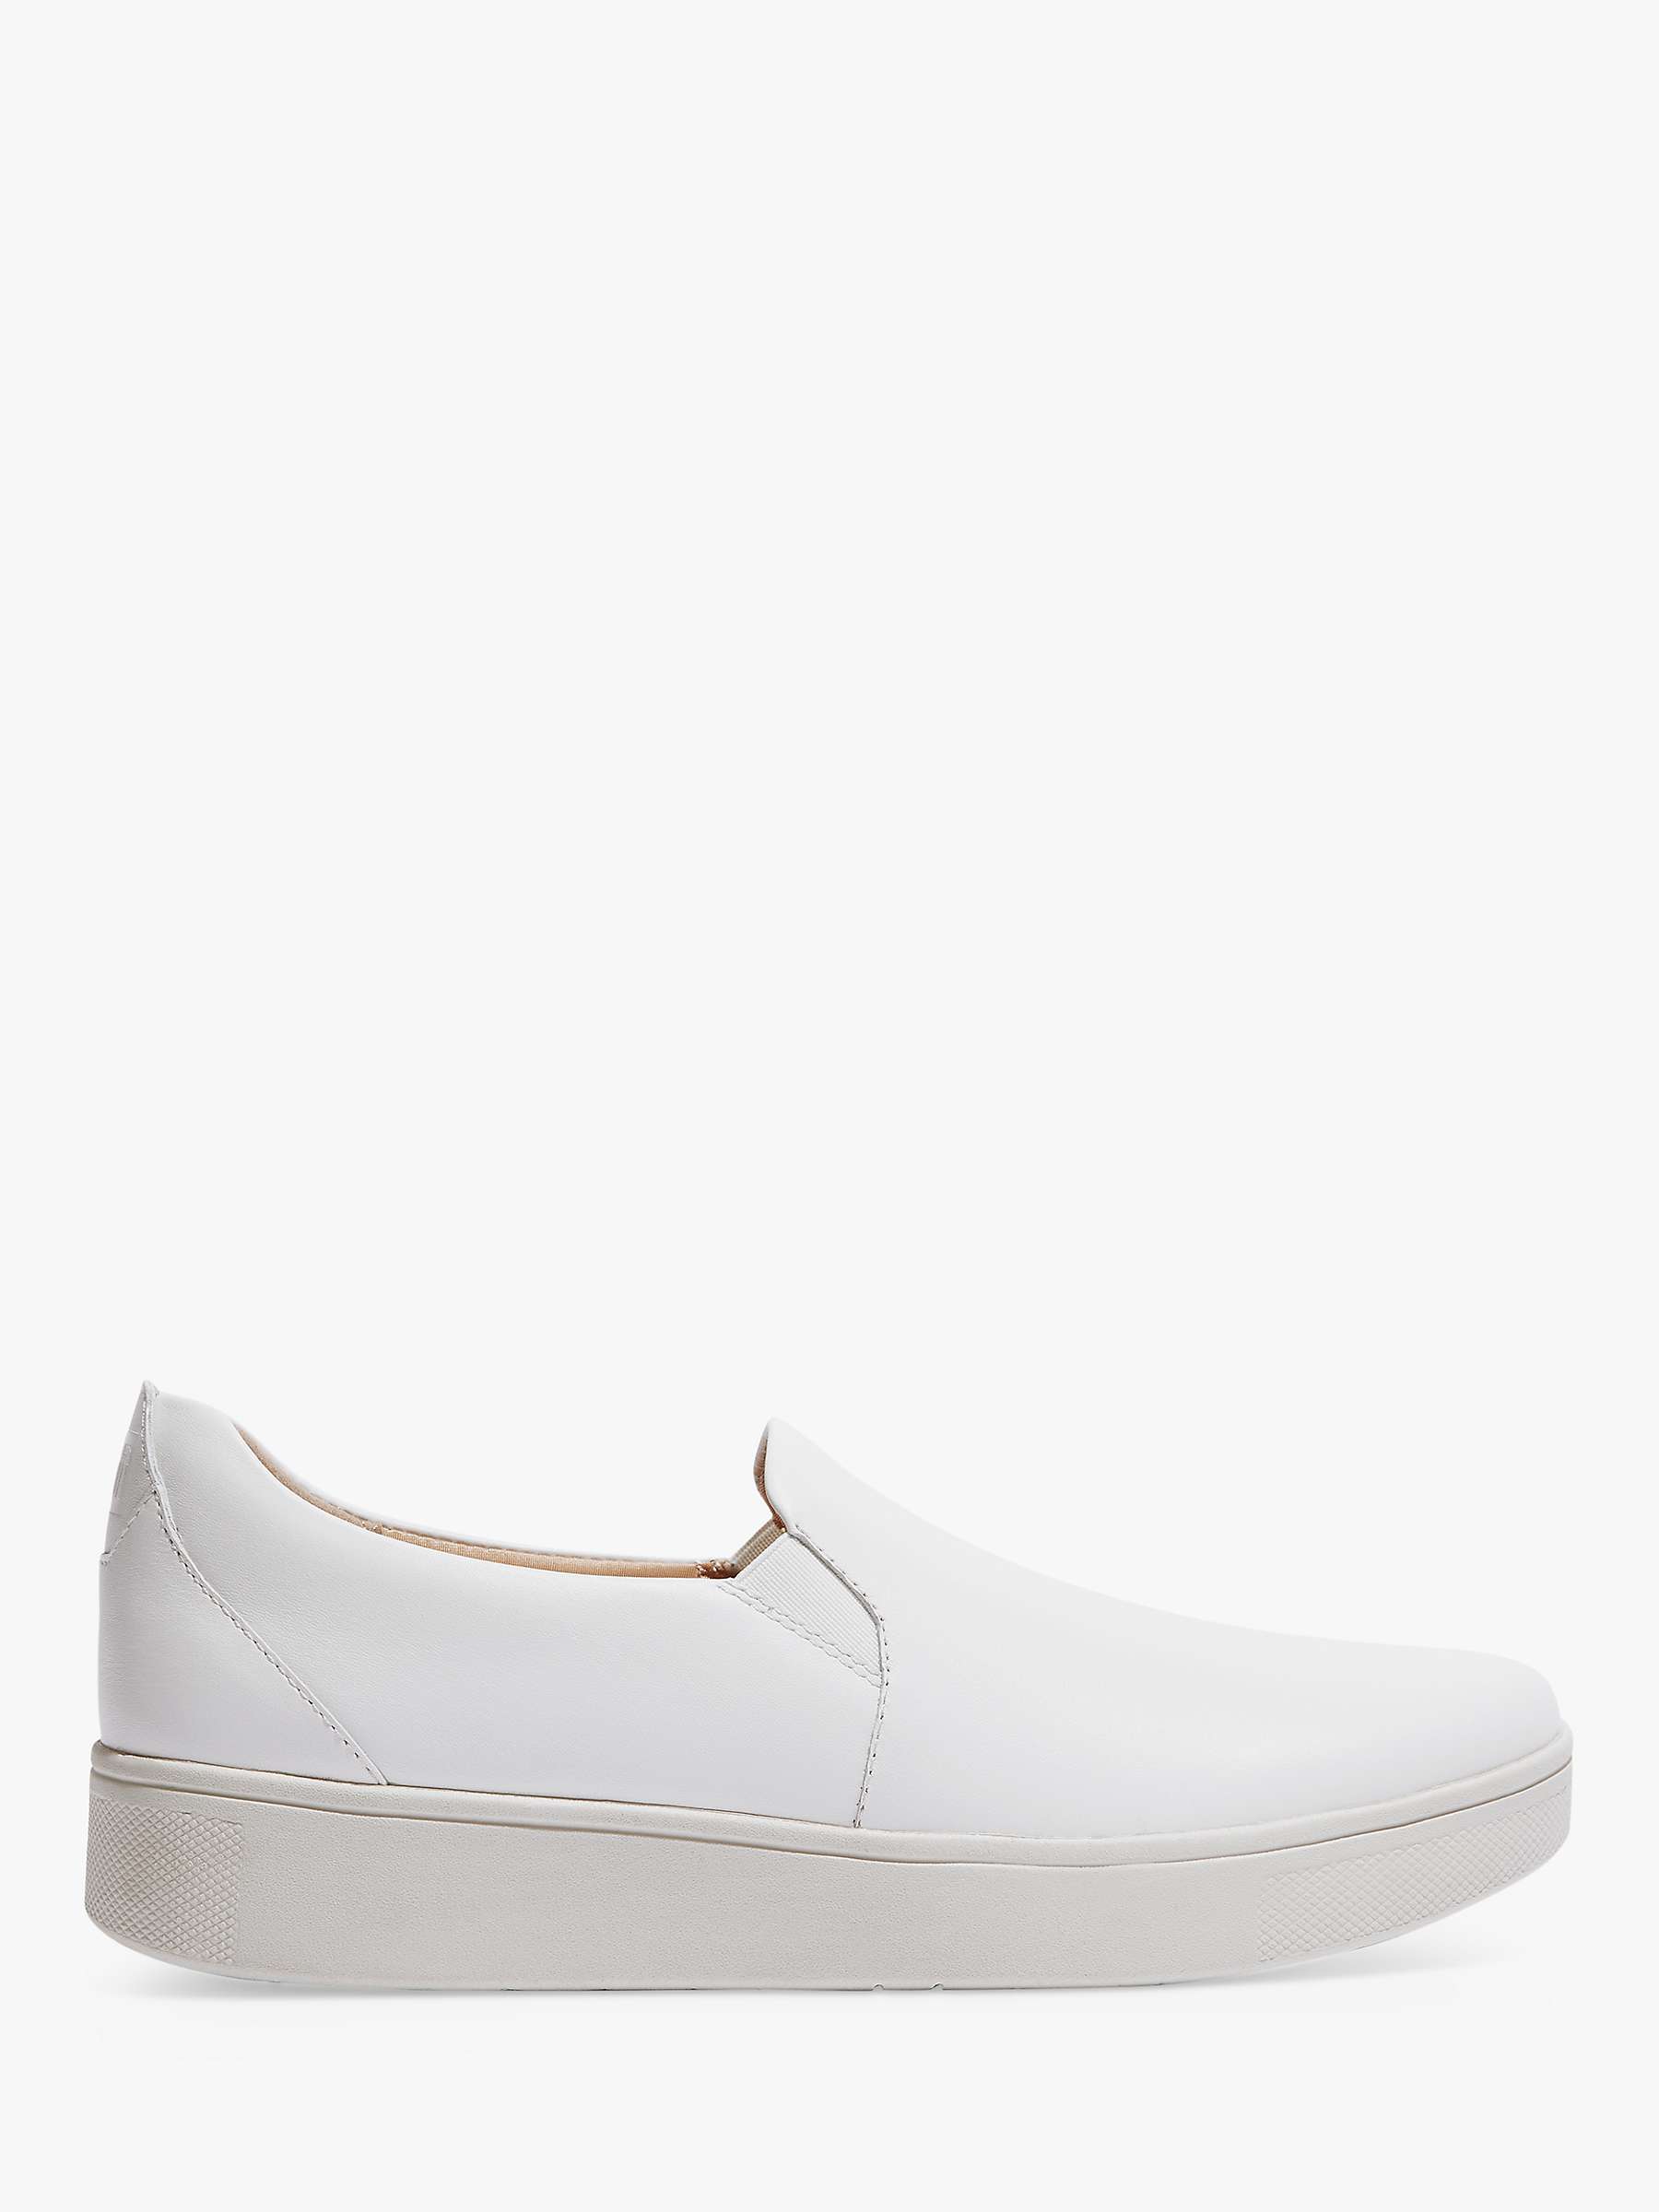 FitFlop Rally Leather Slip On Skate Trainers, White at John Lewis ...